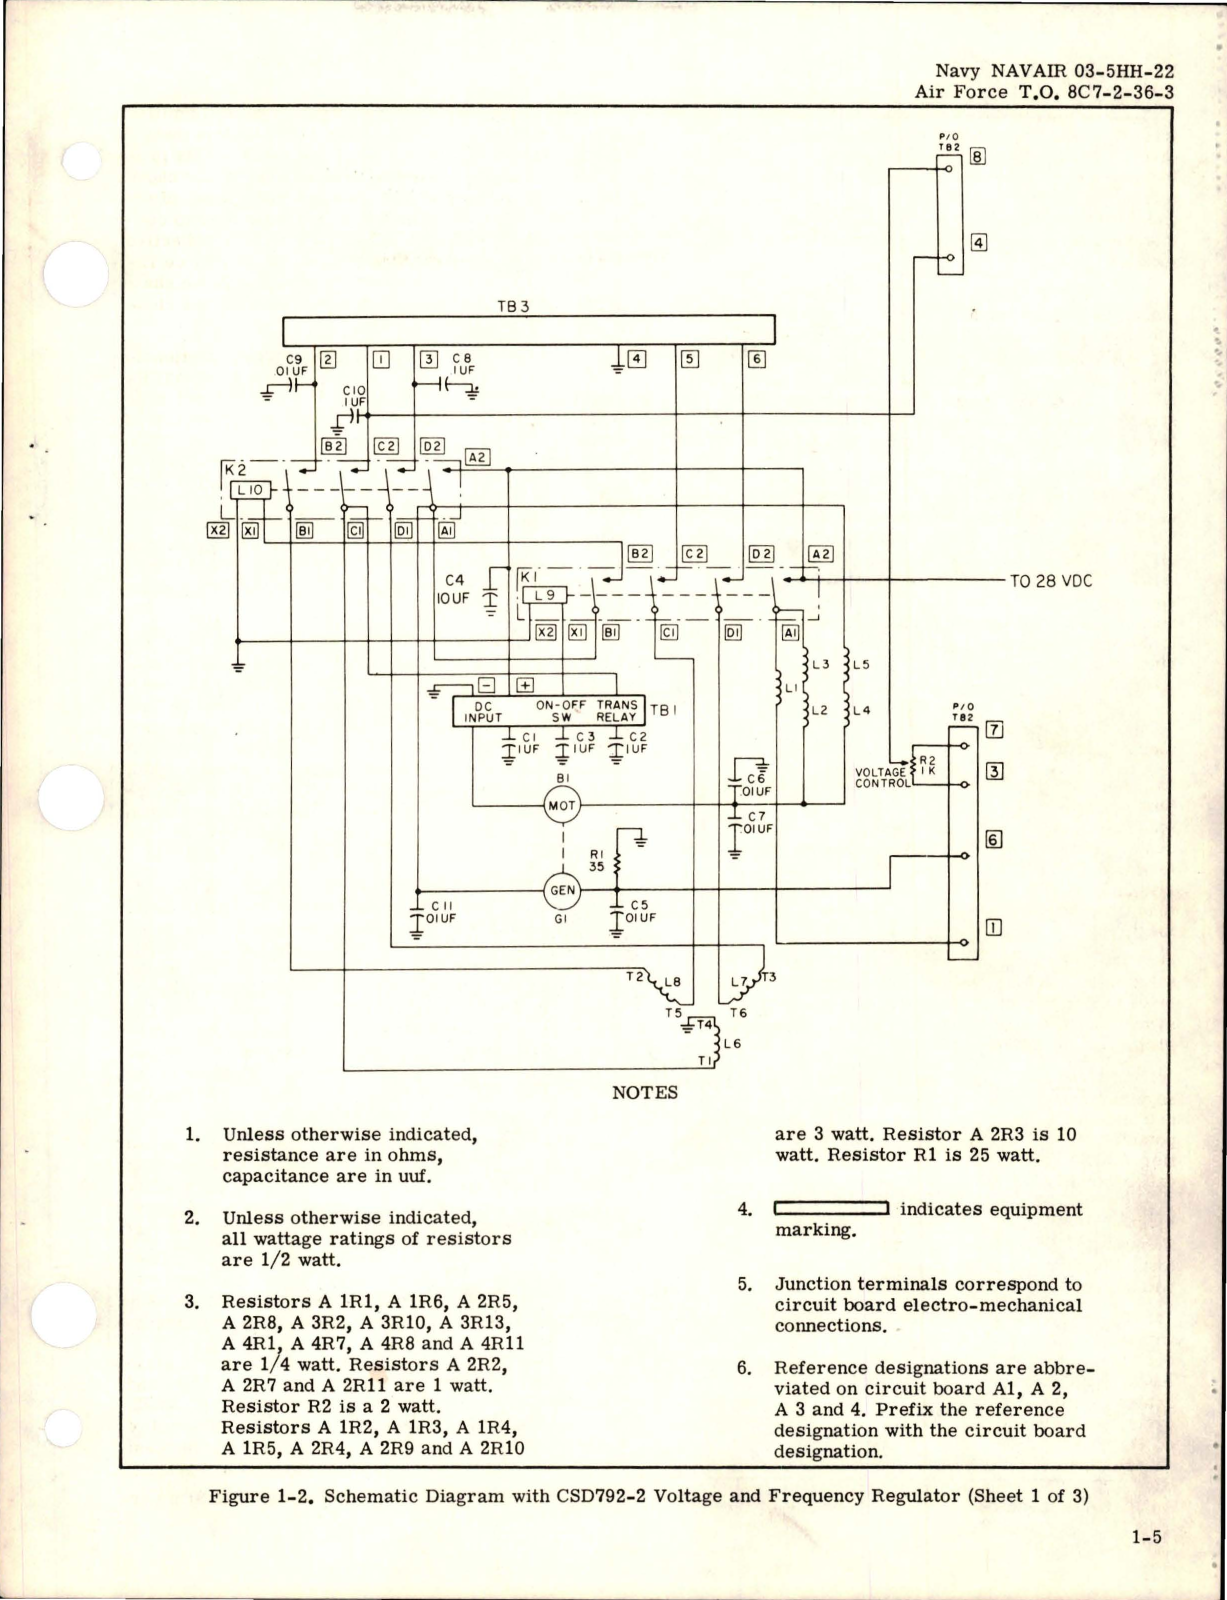 Sample page 9 from AirCorps Library document: Overhaul for Motor Generator Assembly - Part MGE130-200 and MGE130-300 